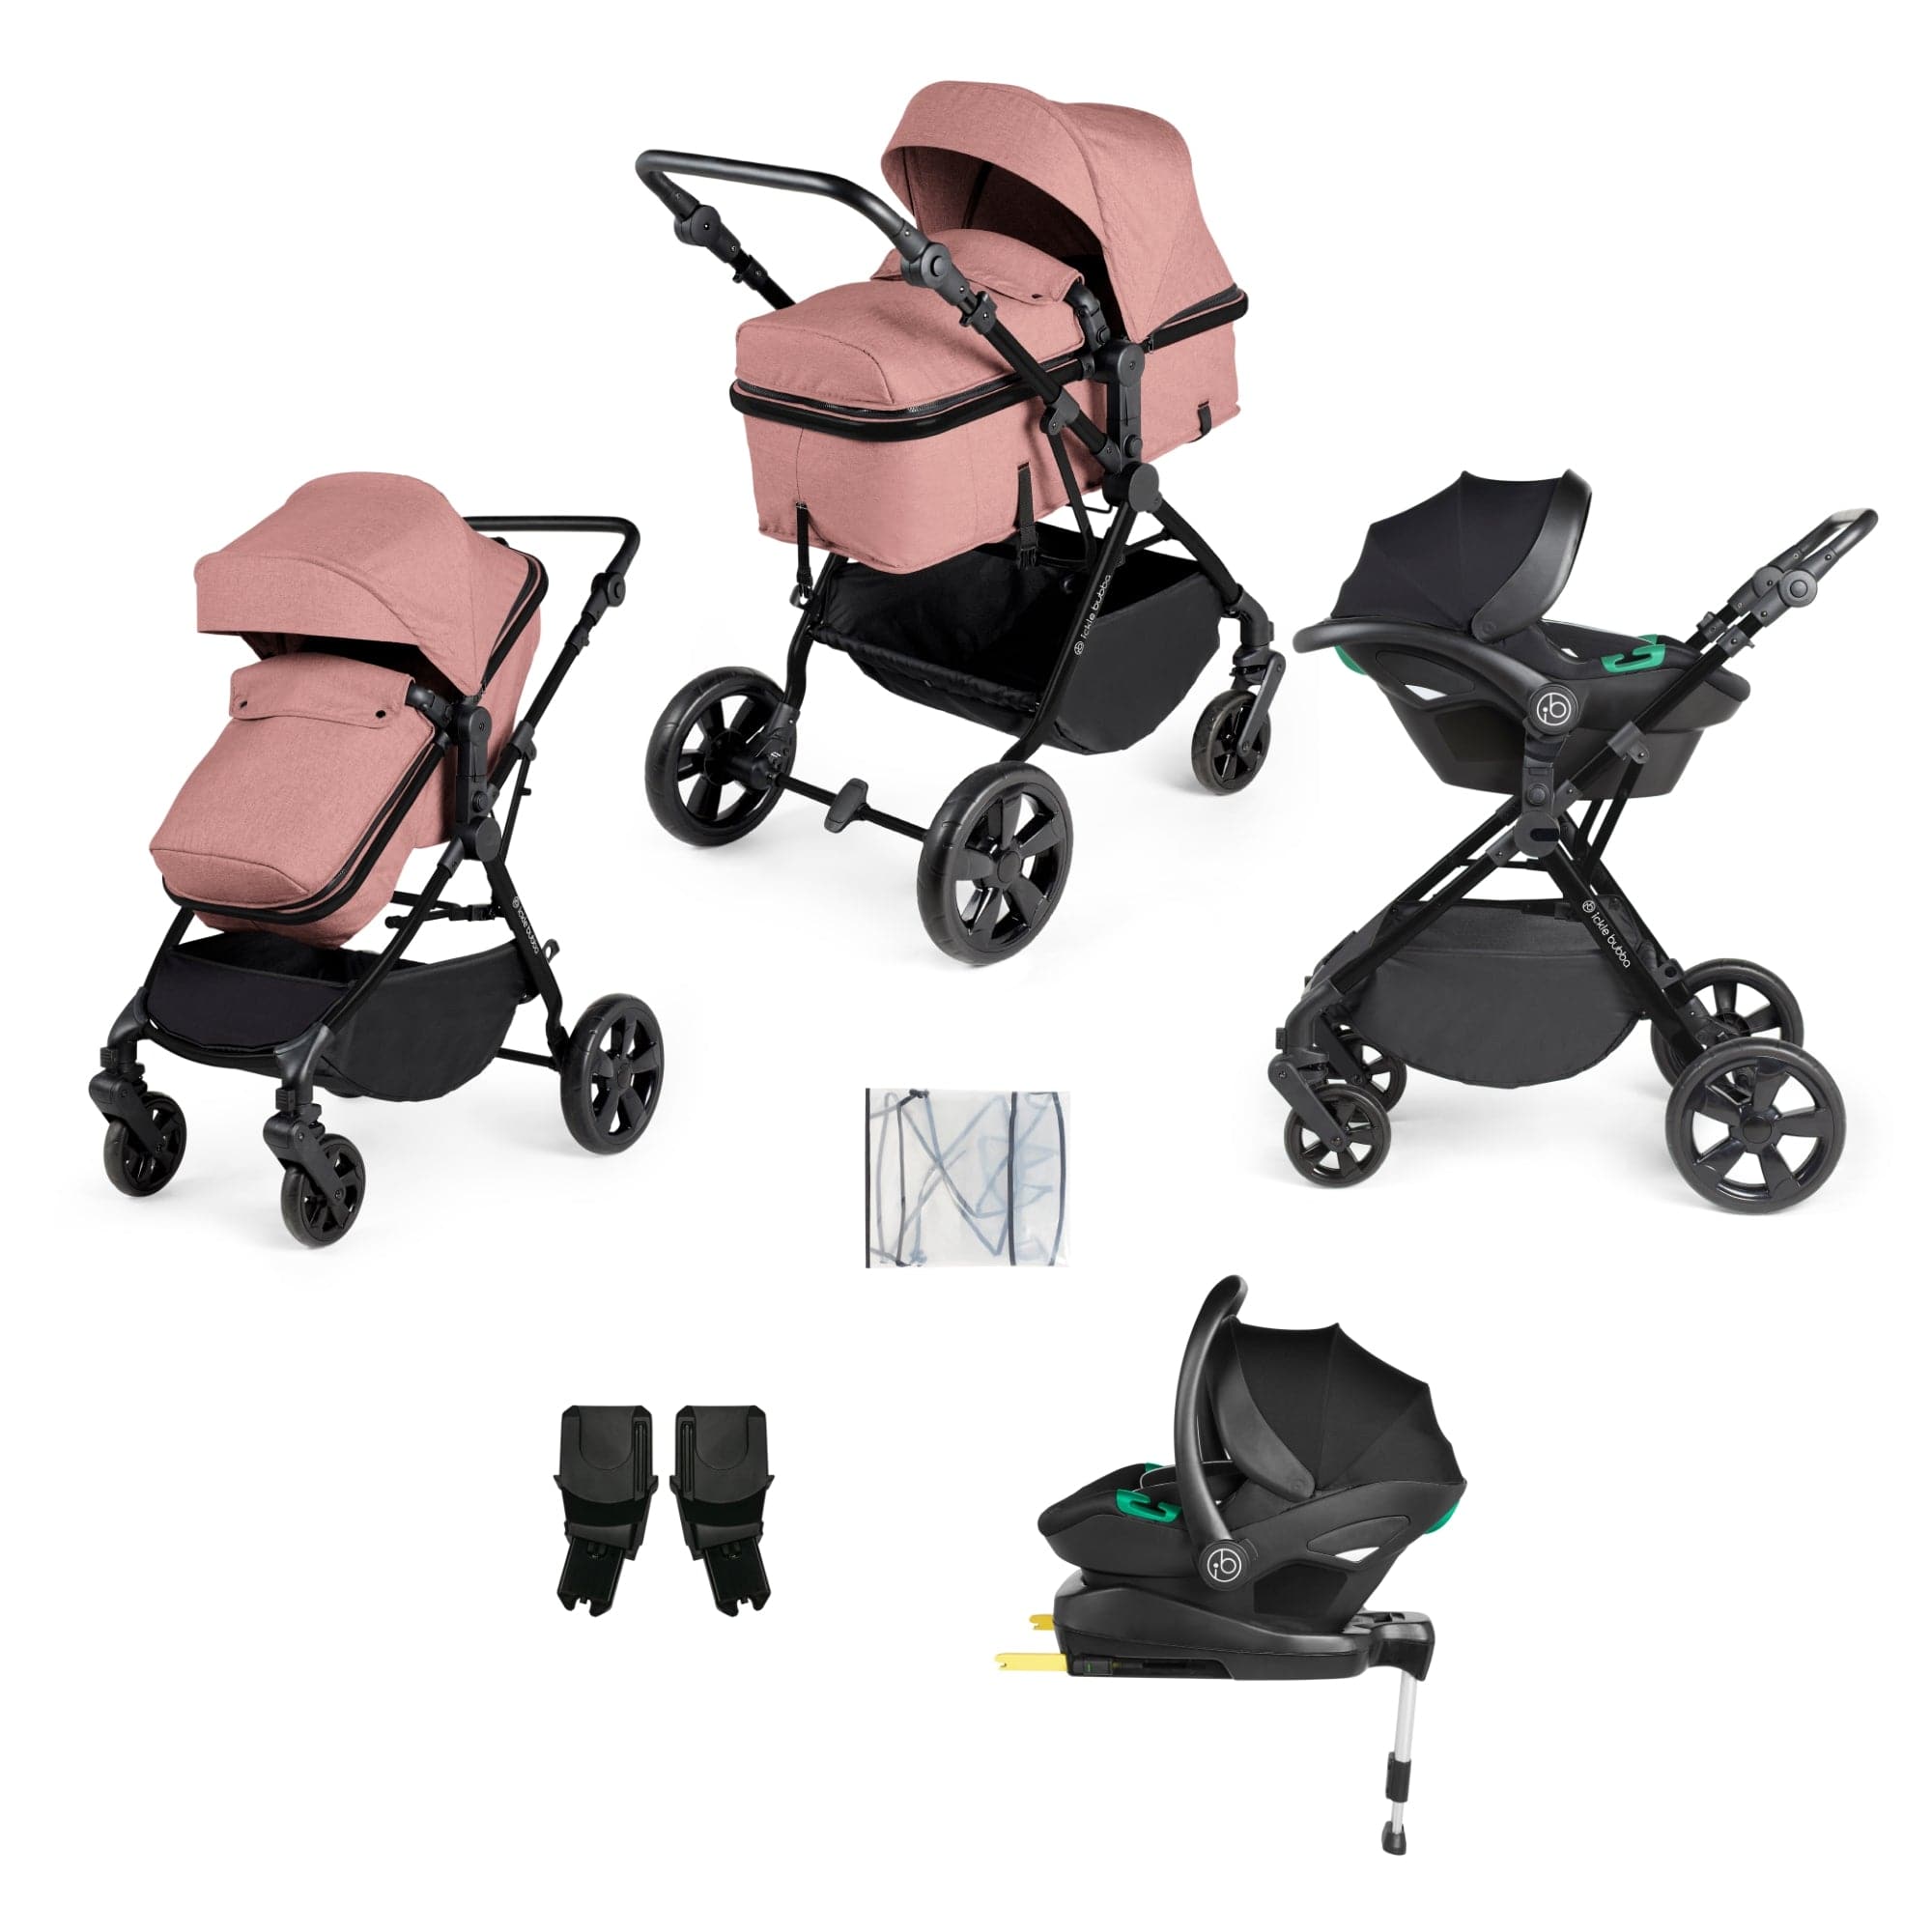 Stomp Luxe Pushchair, Galaxy Car Seat & ISOFIX Base